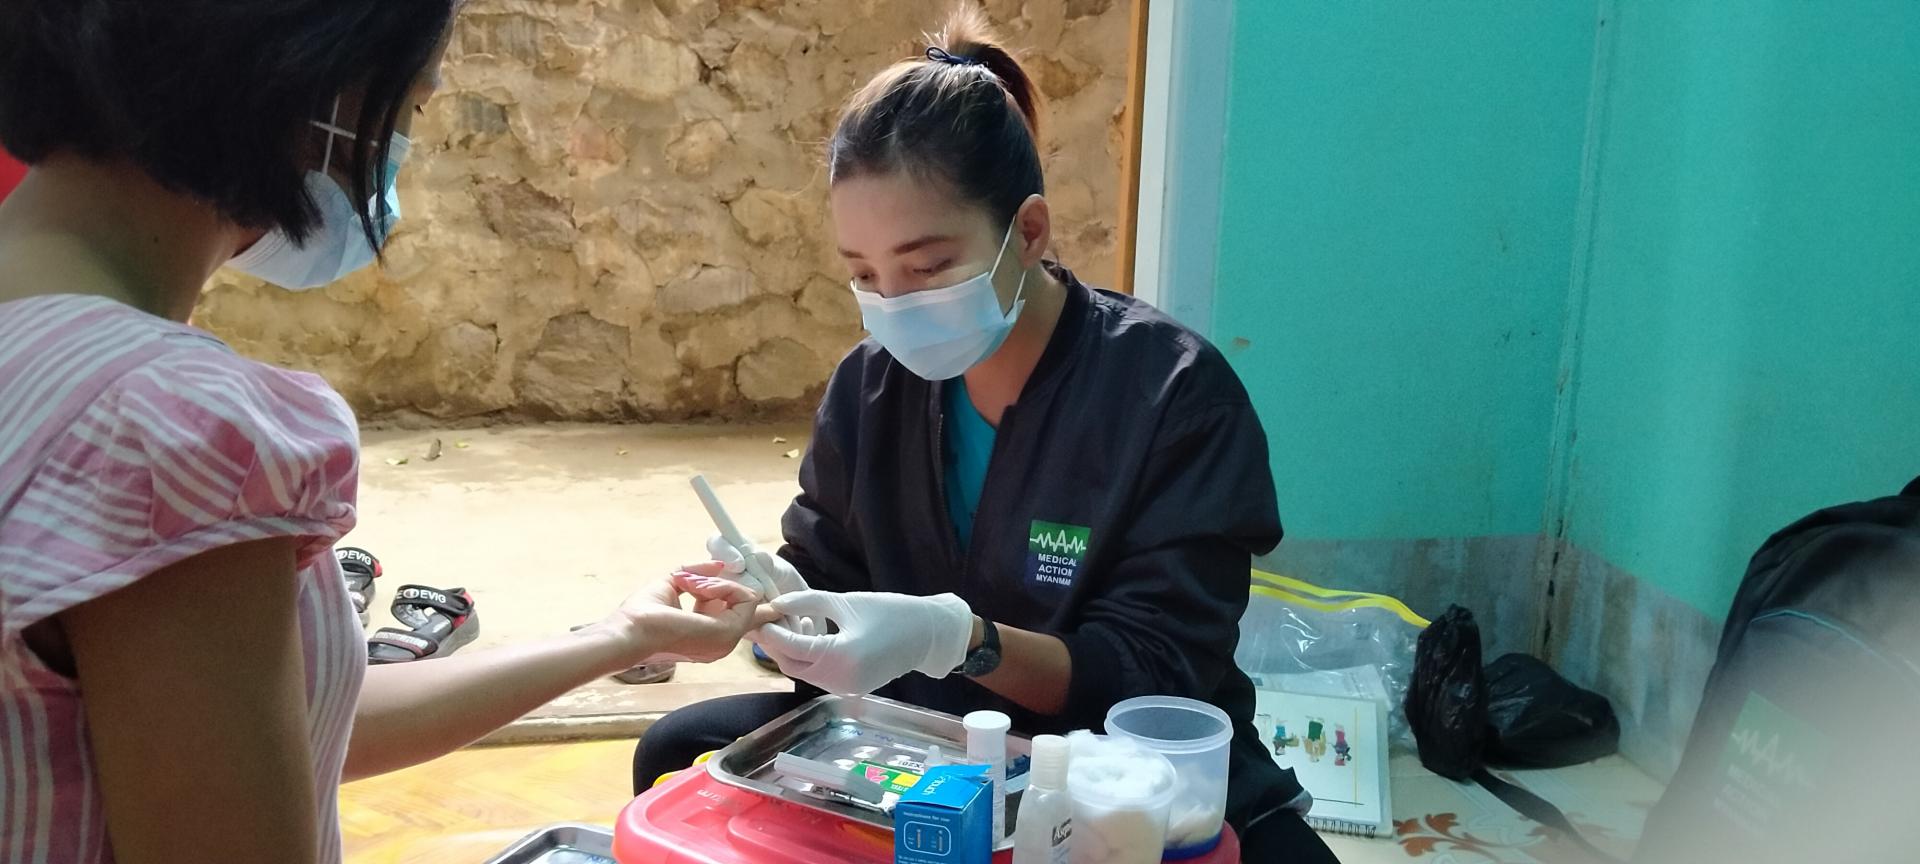 A peer educator conducting HIV case-based surveillance among female sex workers in Hpakant township. Photo: Medical Action Myanmar 